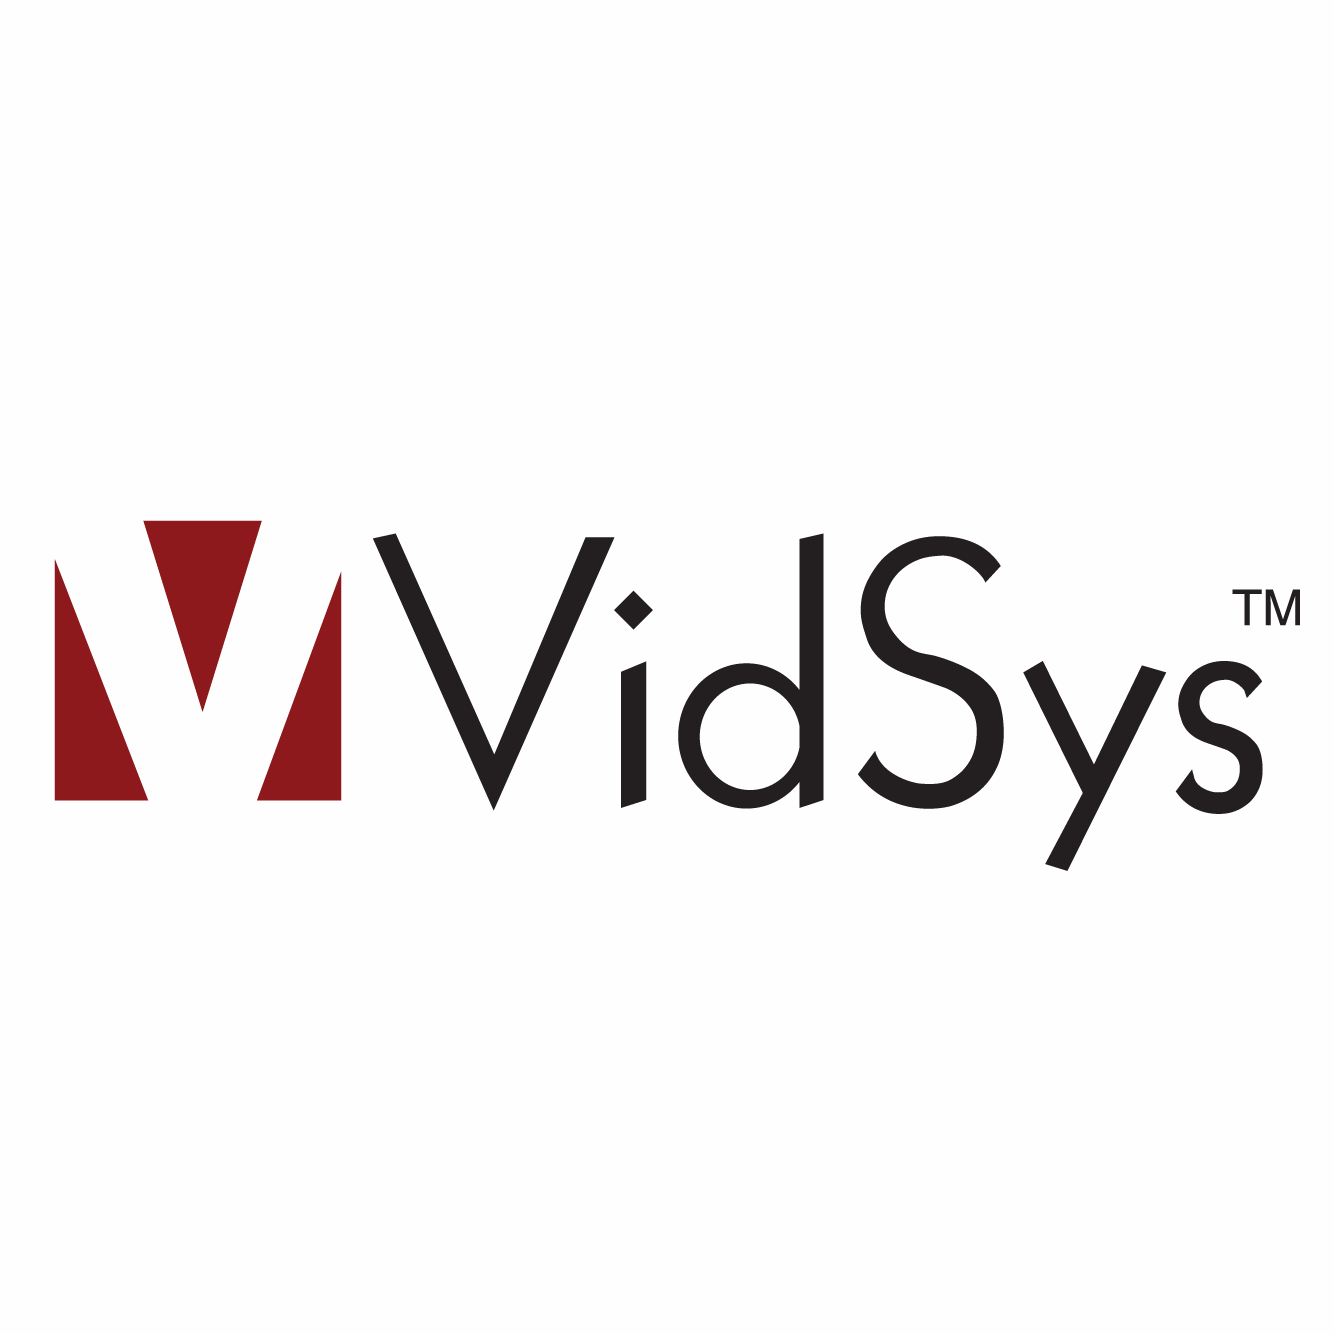 https://www.securetech.ae/wp-content/uploads/2019/02/14.VIDSYS.png